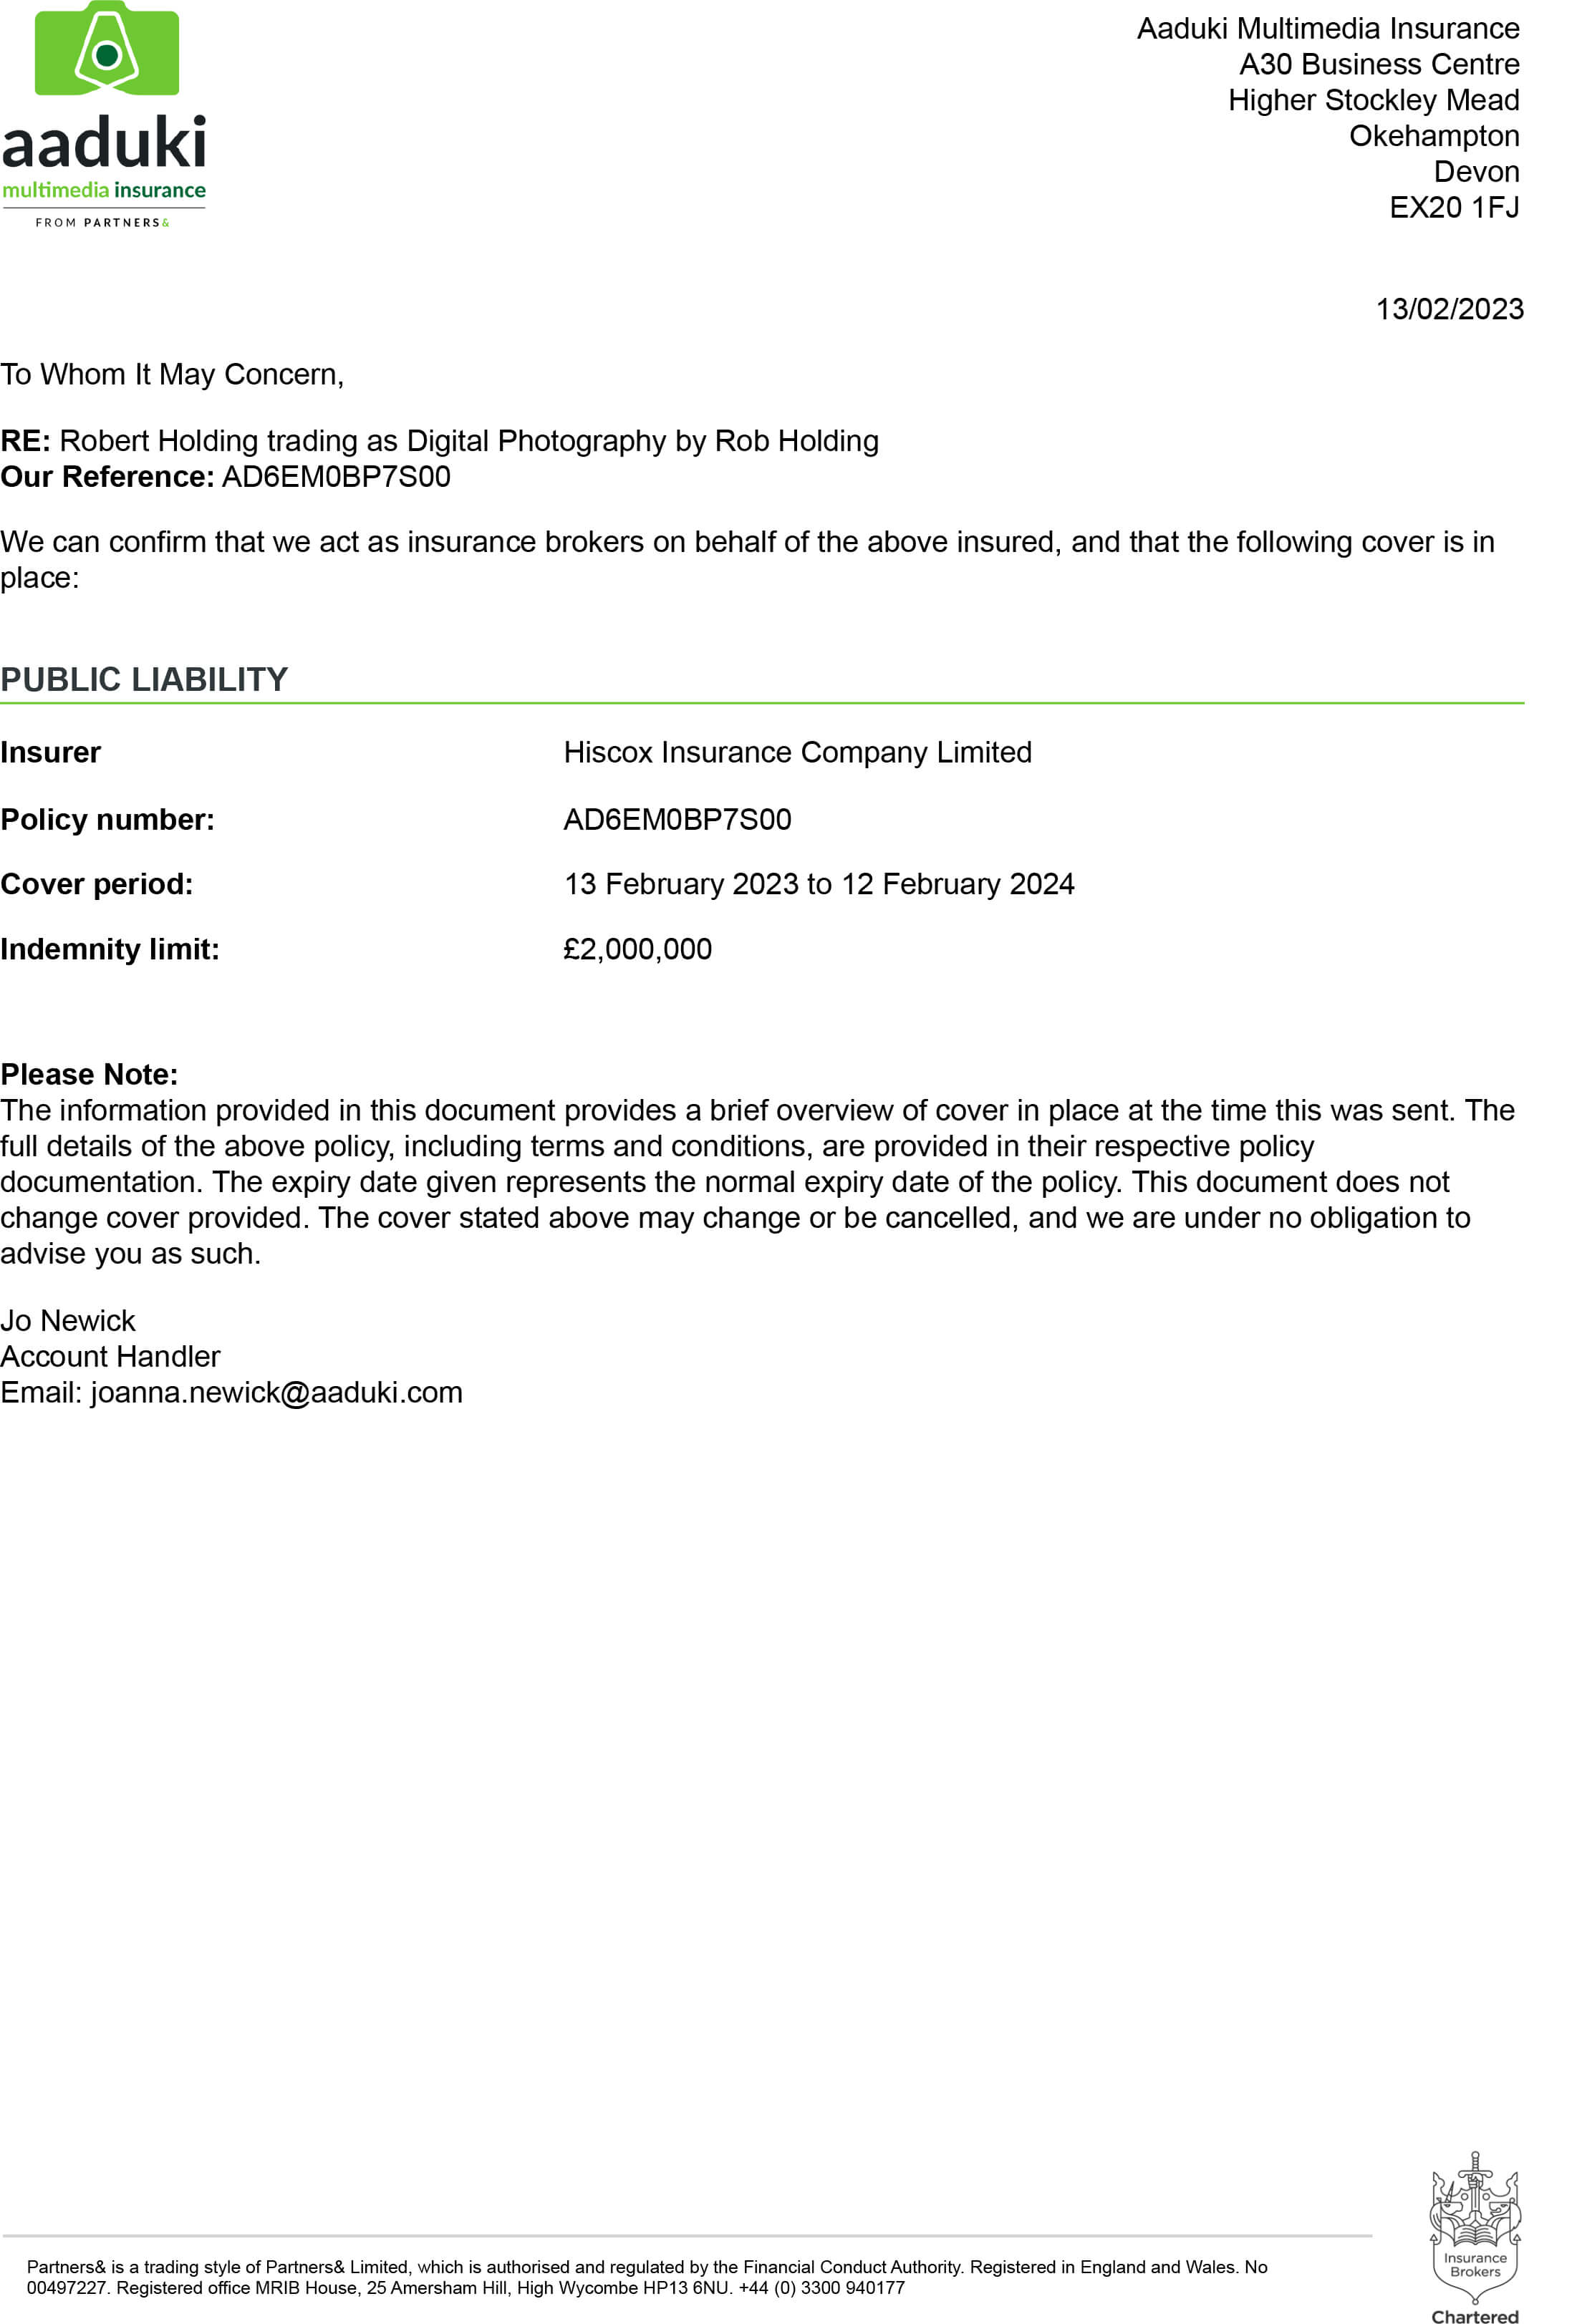 Digital Photography by Rob Holding's Insurance Certificate